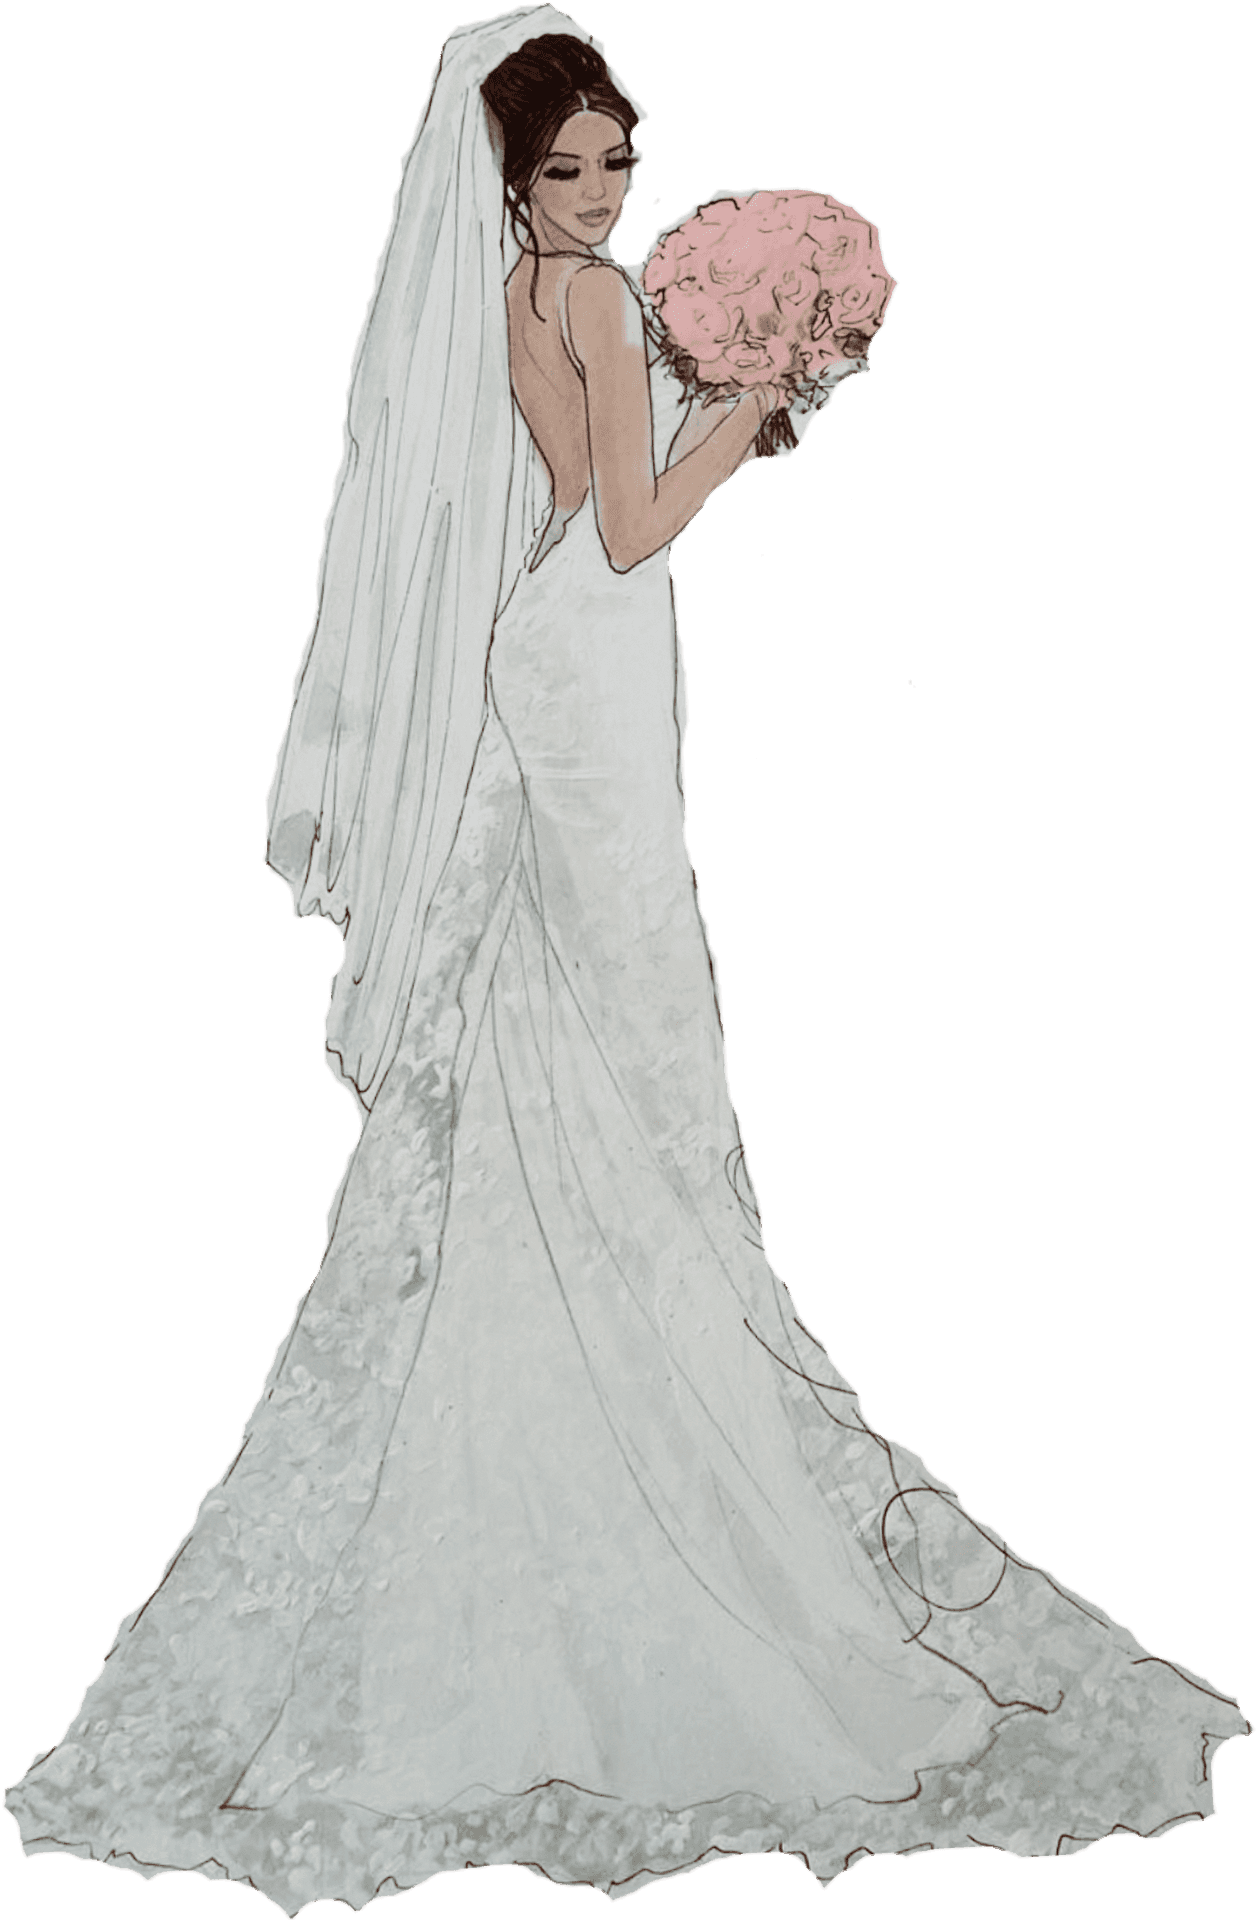 Elegant Bridein White Gownwith Bouquet PNG image